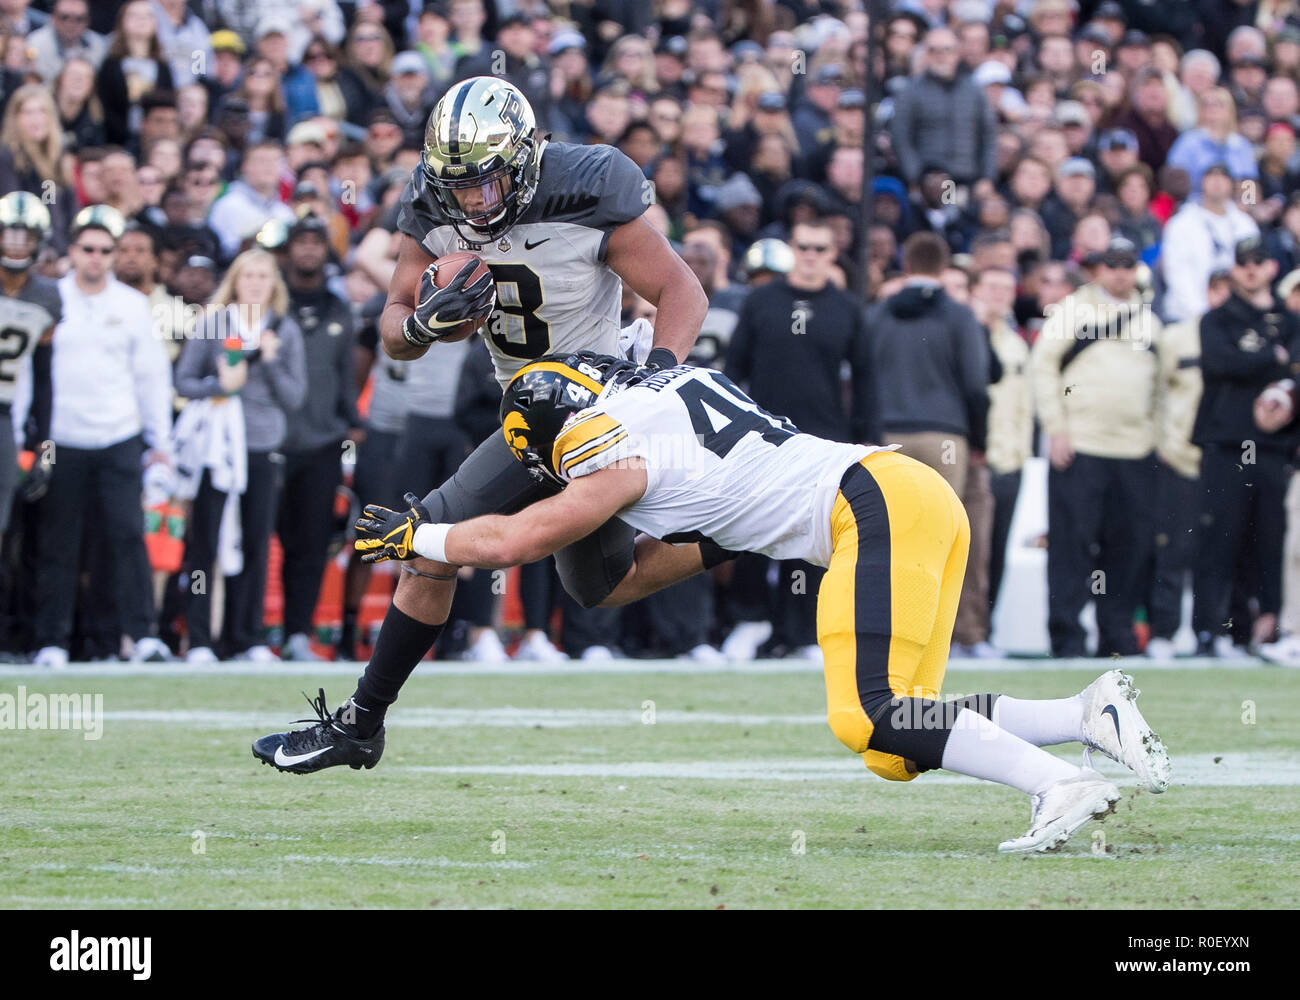 November 03, 2018: Purdue running back Markell Jones (8) runs with the ball  as Iowa linebacker Jack Hockaday (48) attempts to make the tackle during  NCAA football game action between the Iowa